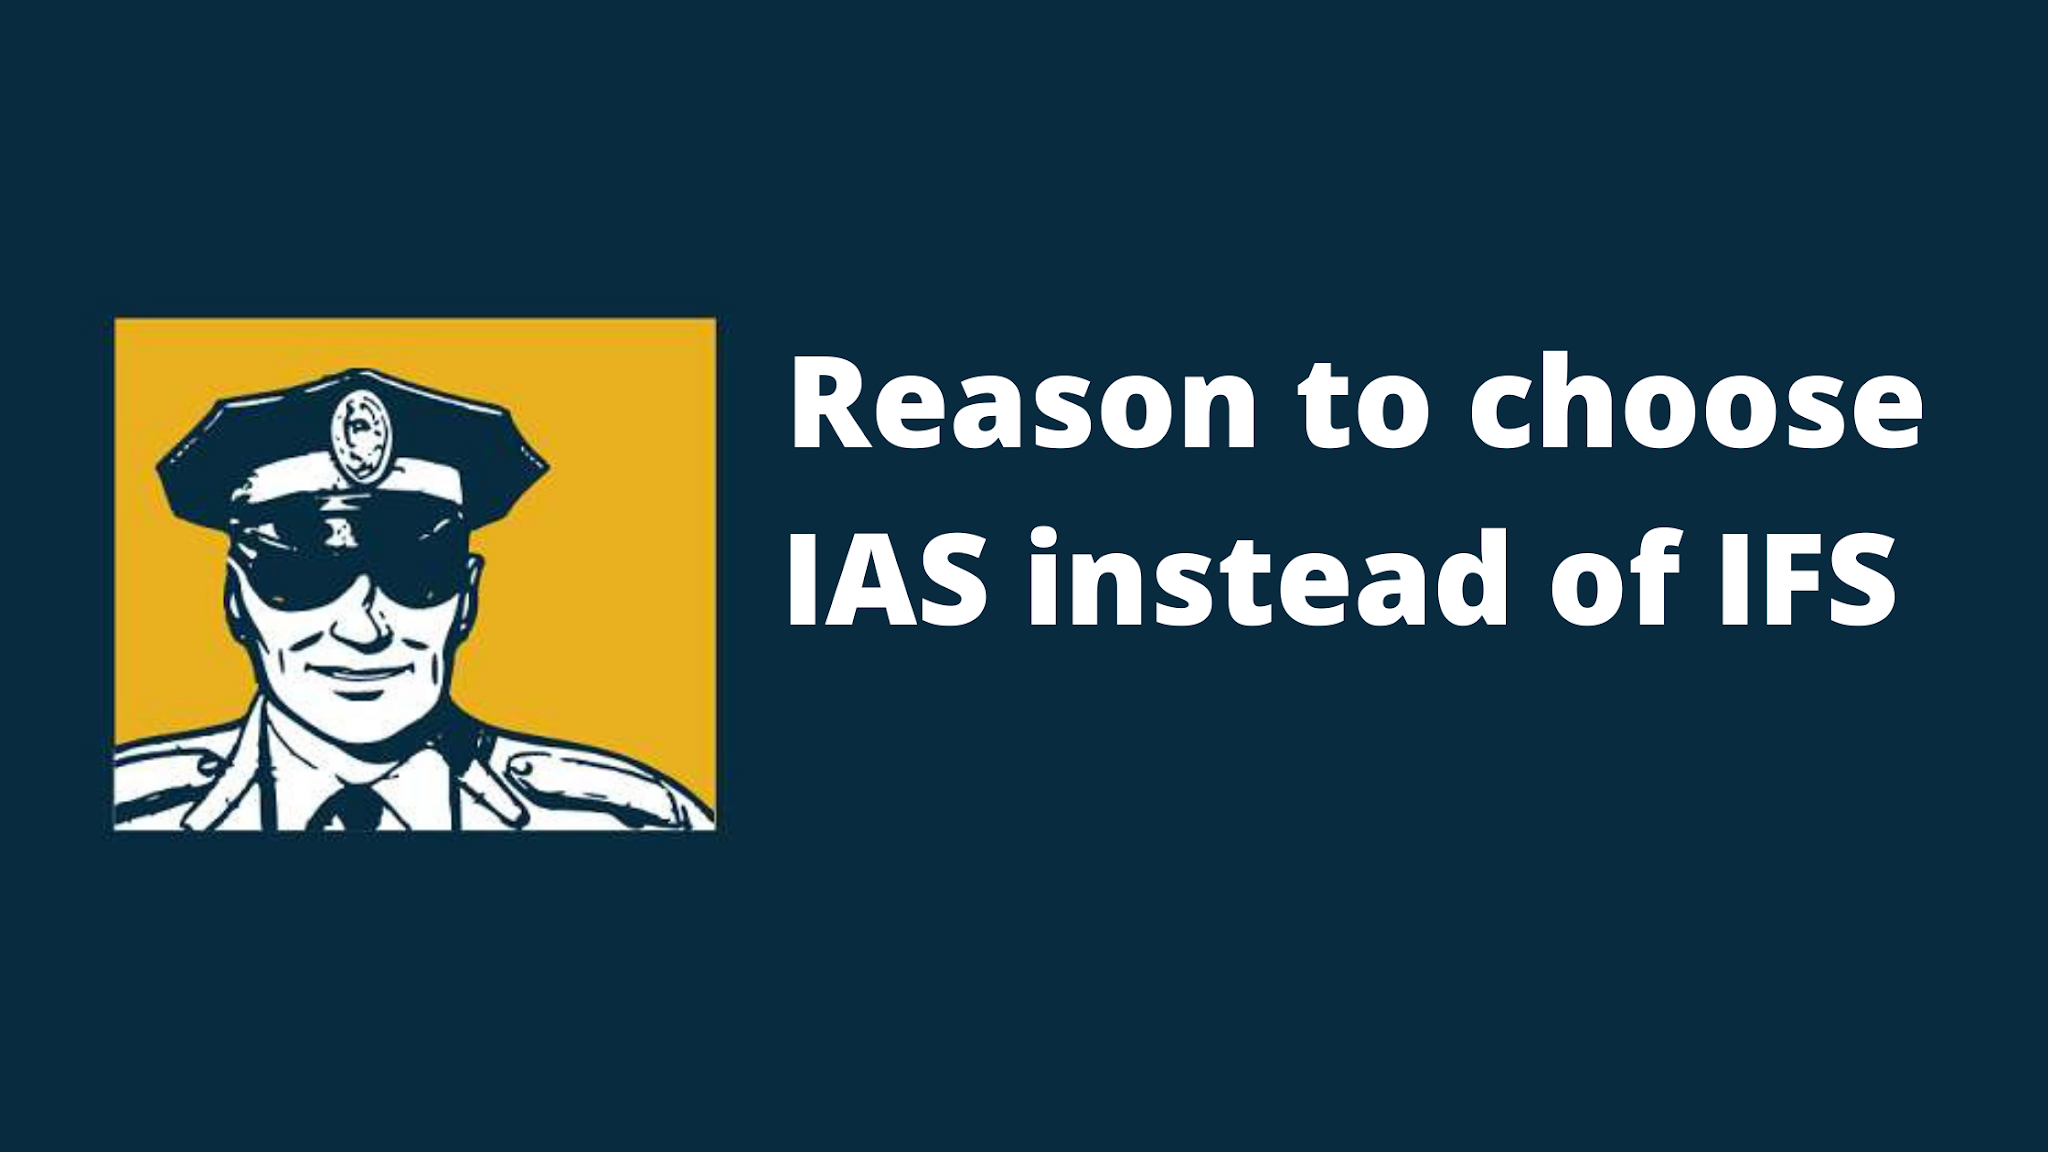 Reason to choose IAS instead of IFS